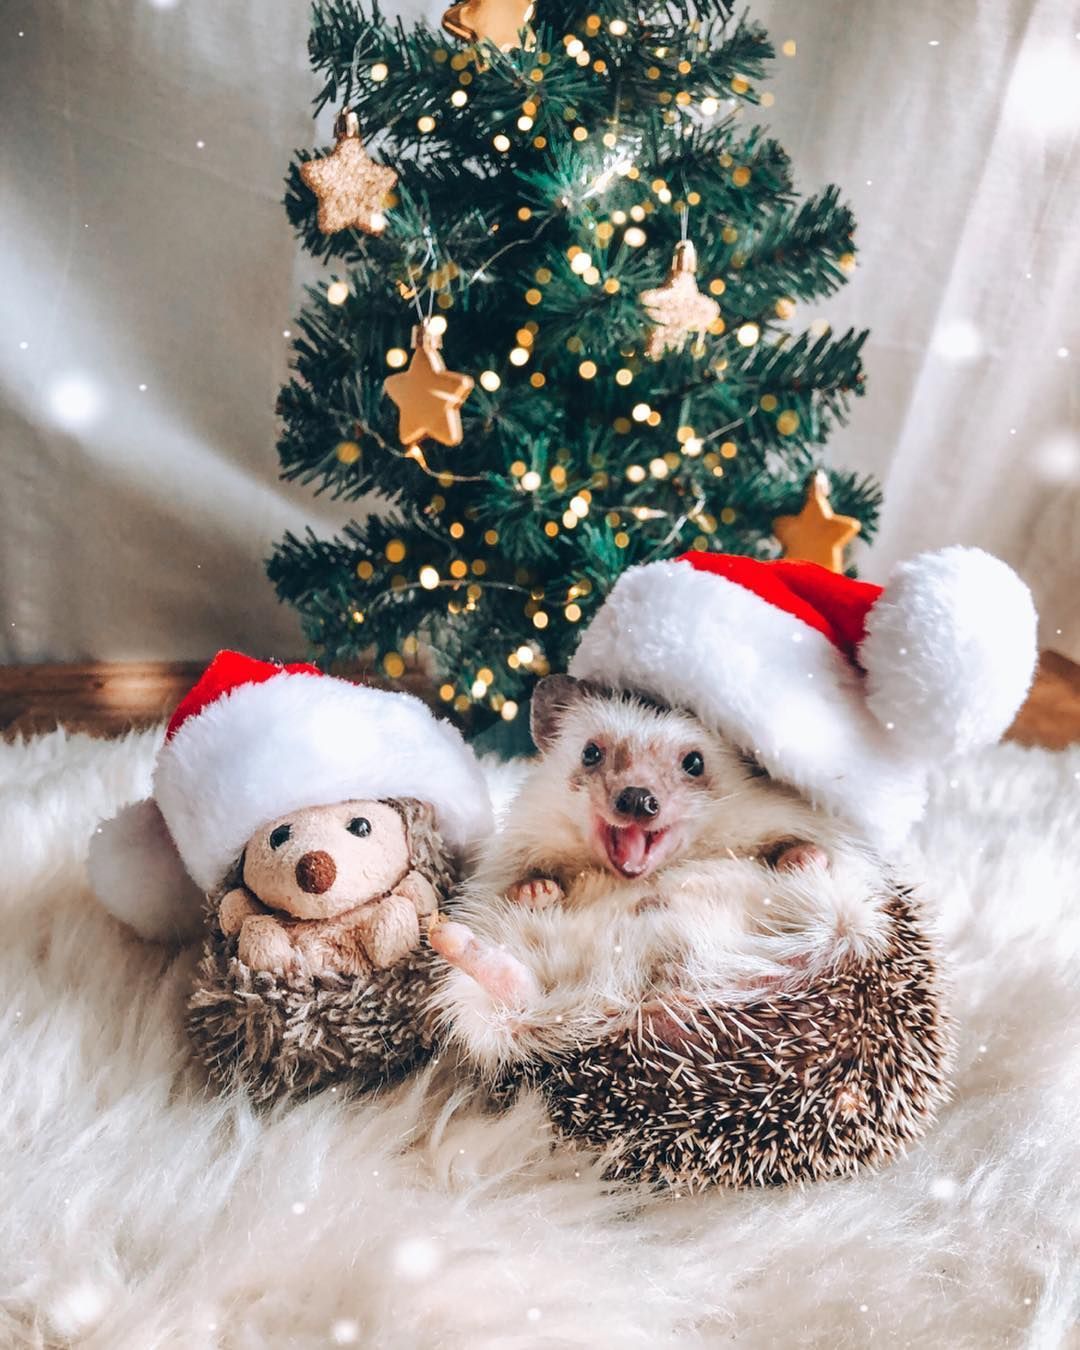 Mr.Pokee the Hedgehog on Instagram: “It's the HAPPIEST time of the year